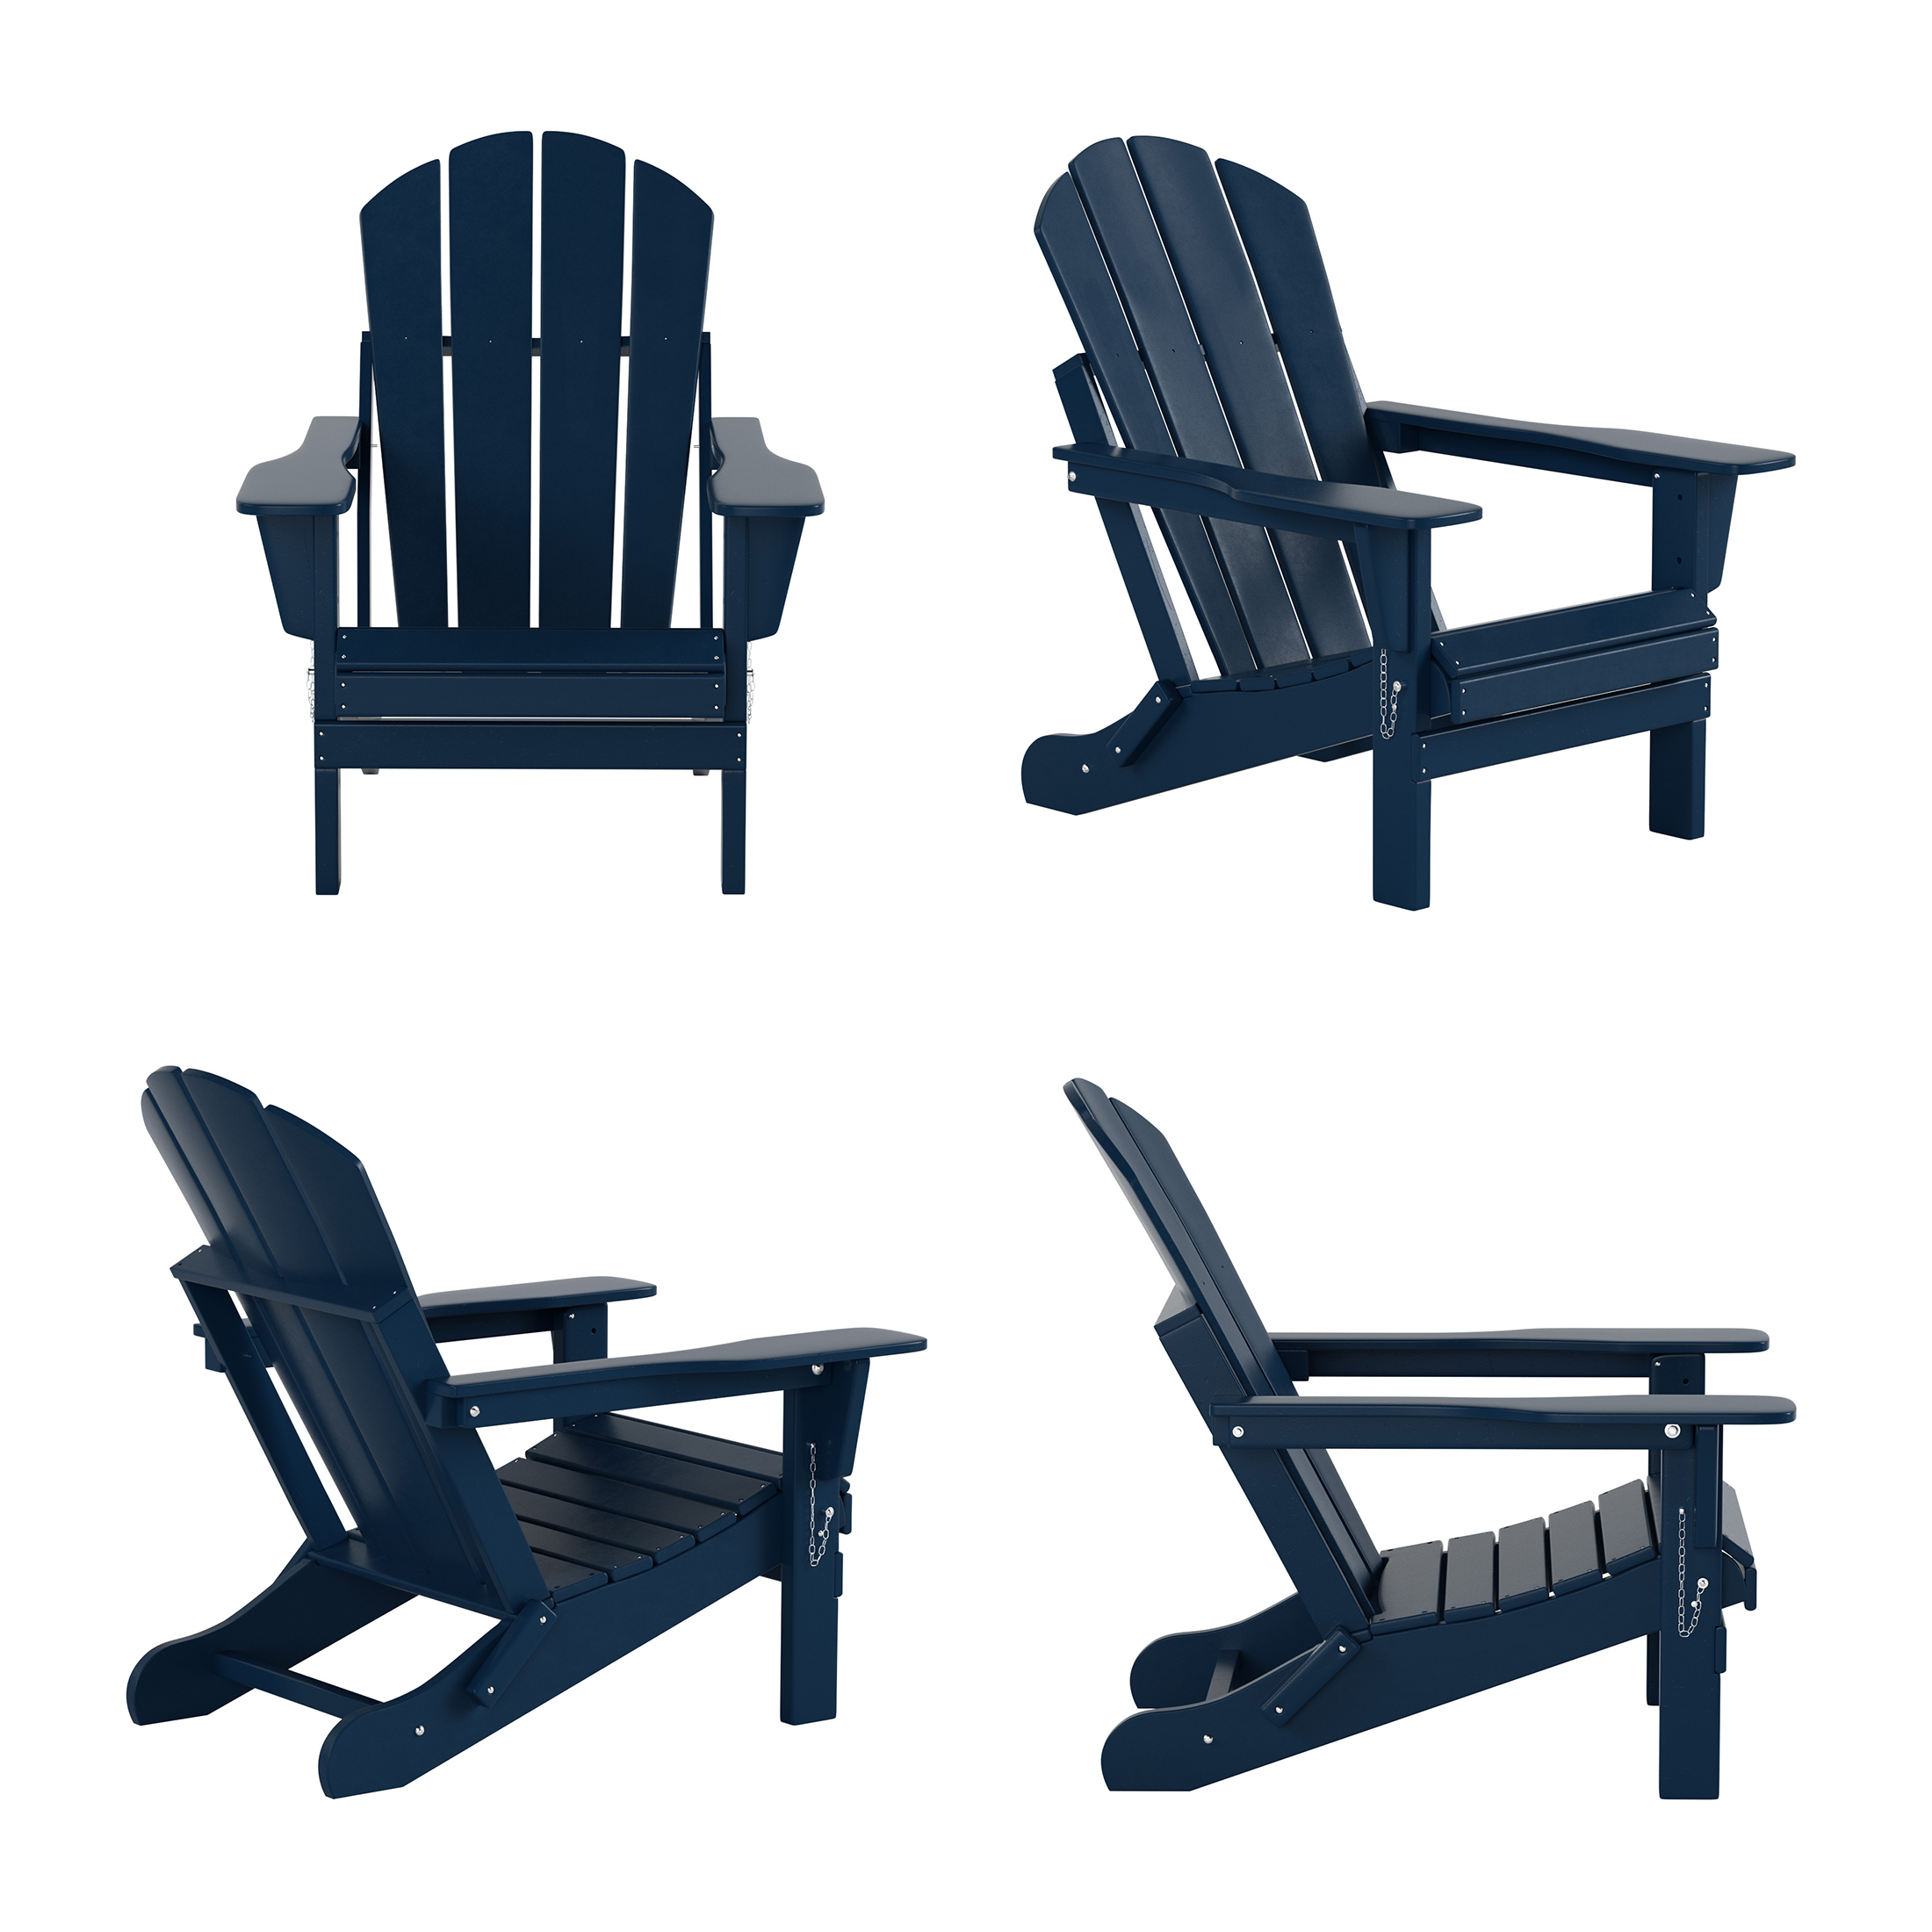 WestinTrends Malibu Outdoor Lounge Chairs Set, 5-Pieces Adirondack Chair Set of 2 with Ottoman and Side Table, All Weather Poly Lumber Patio Lawn Folding Chair for Outside, Navy Blue - image 4 of 7